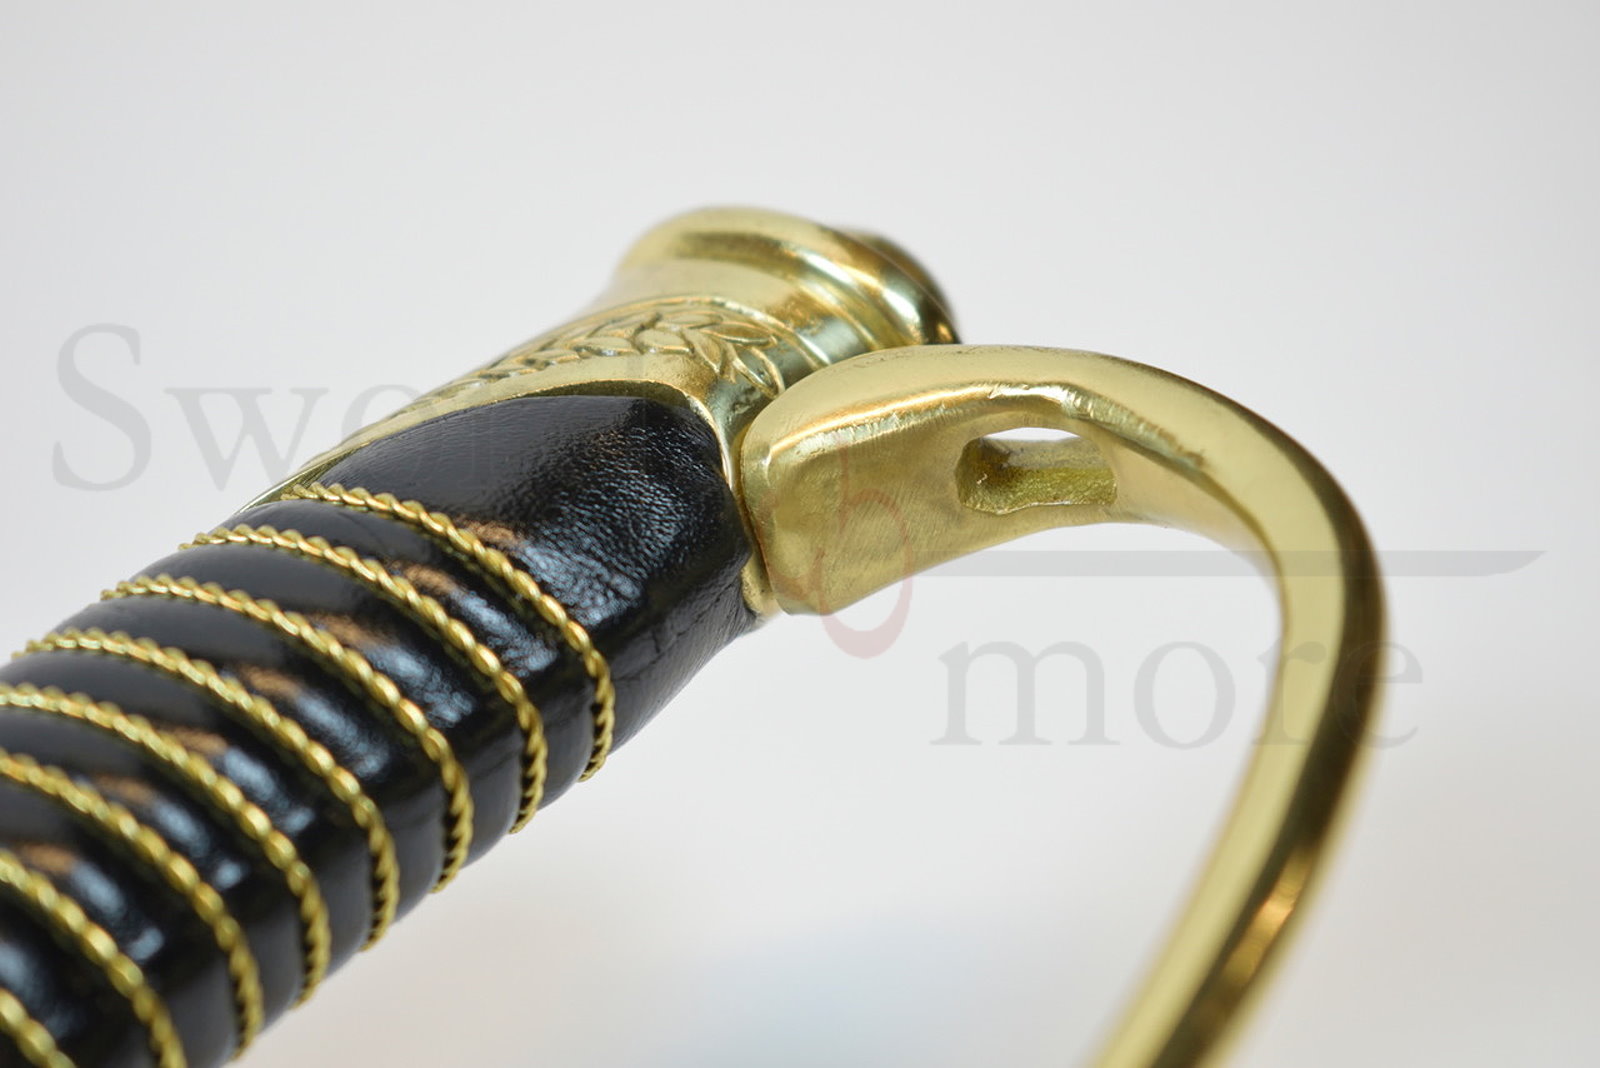 Confederate Cavalry Officer's Saber